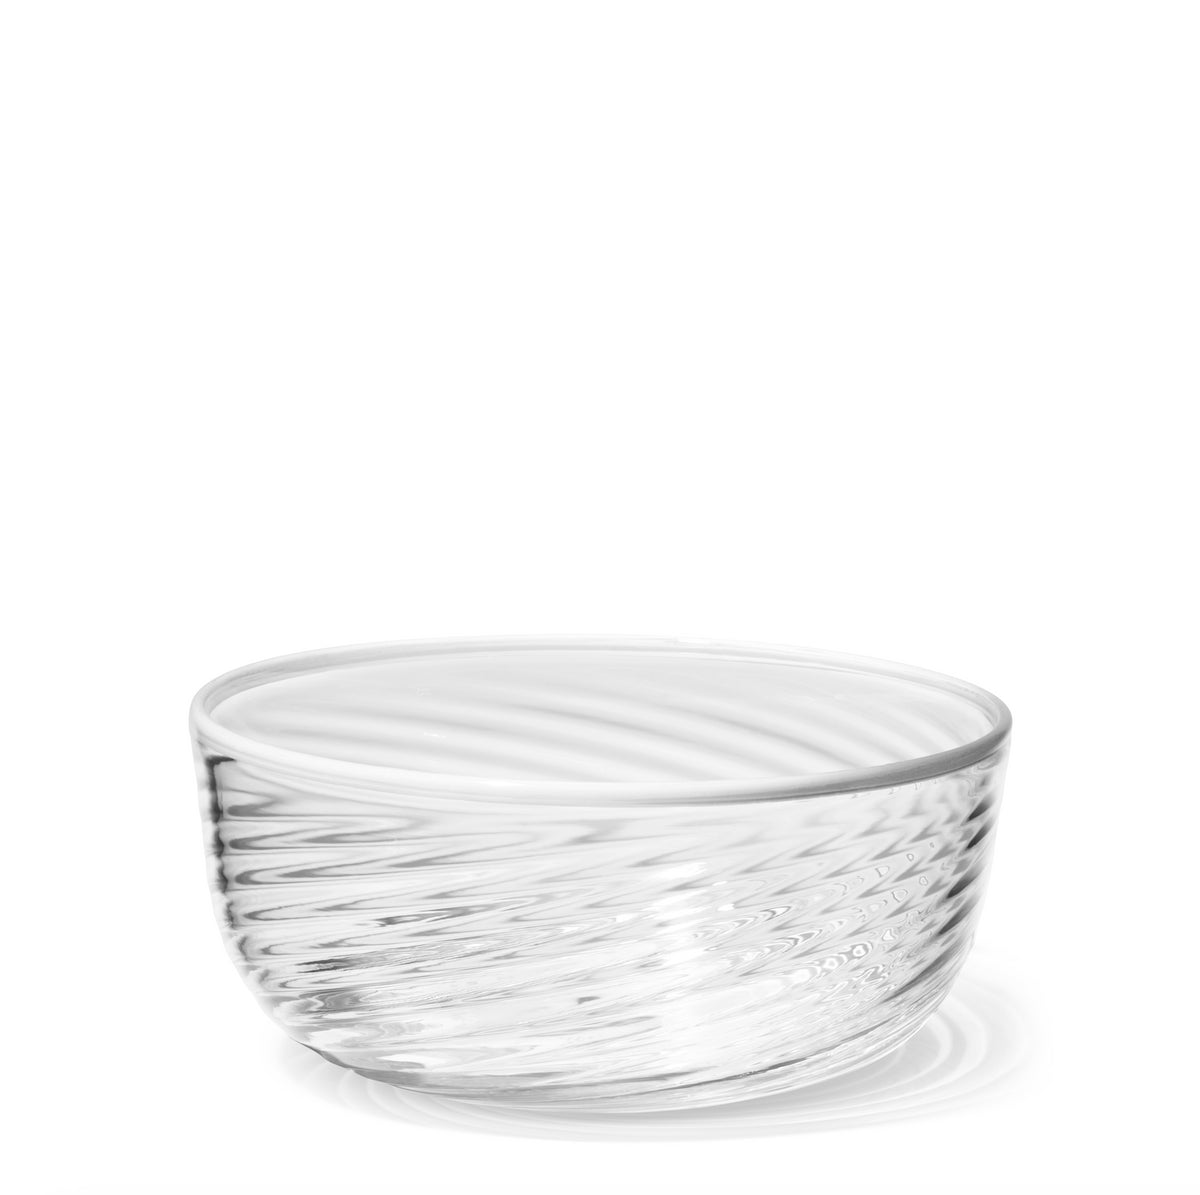 Clementina Swirl Texture Small Bowl with White Rim